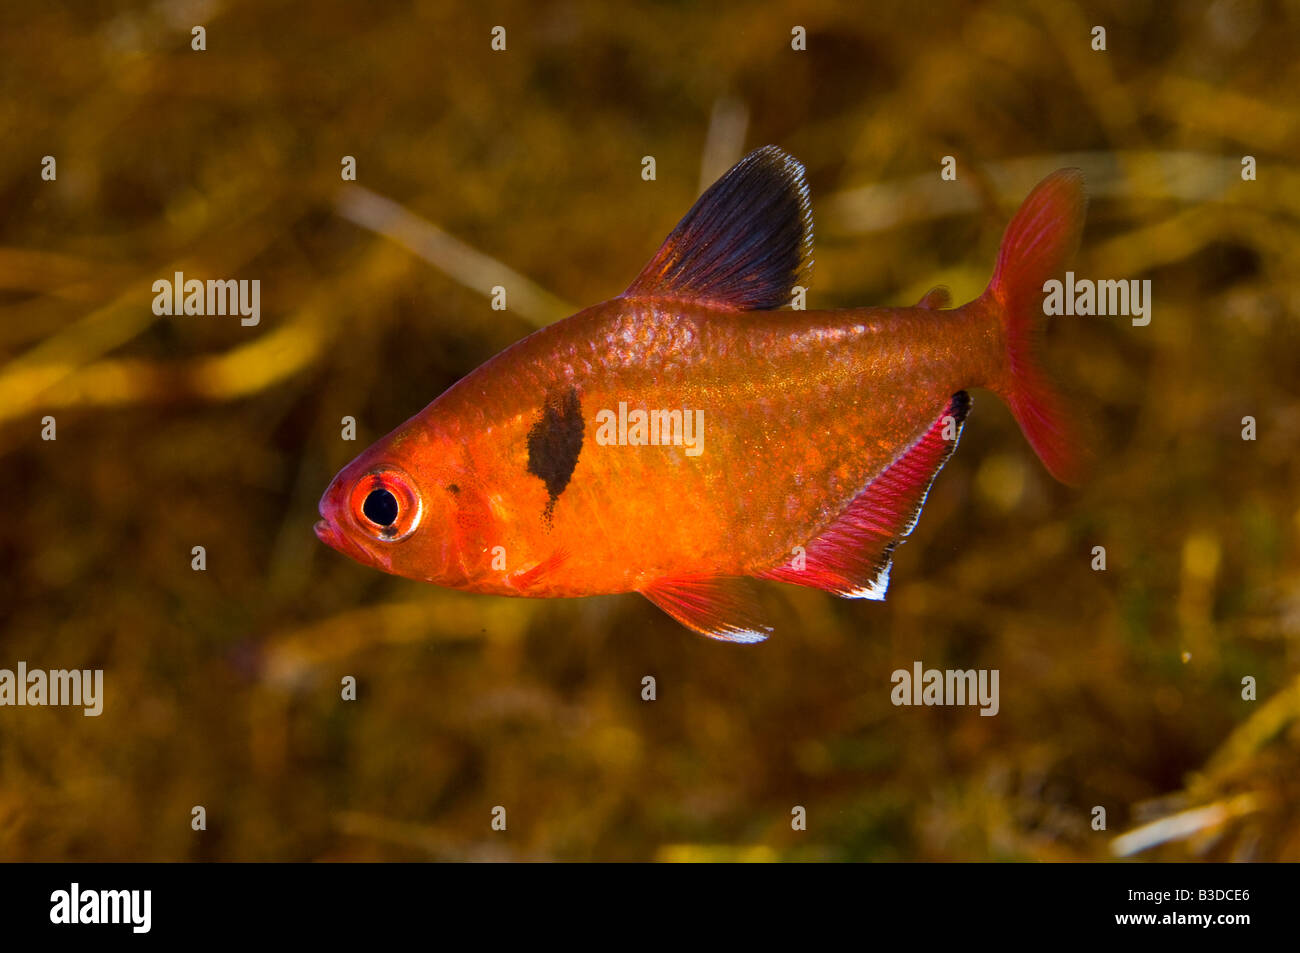 Serpae Tetra Hyphessobrycon eques photographed in a clear water spring in Bonito, Mato Grosso do Sul Stock Photo